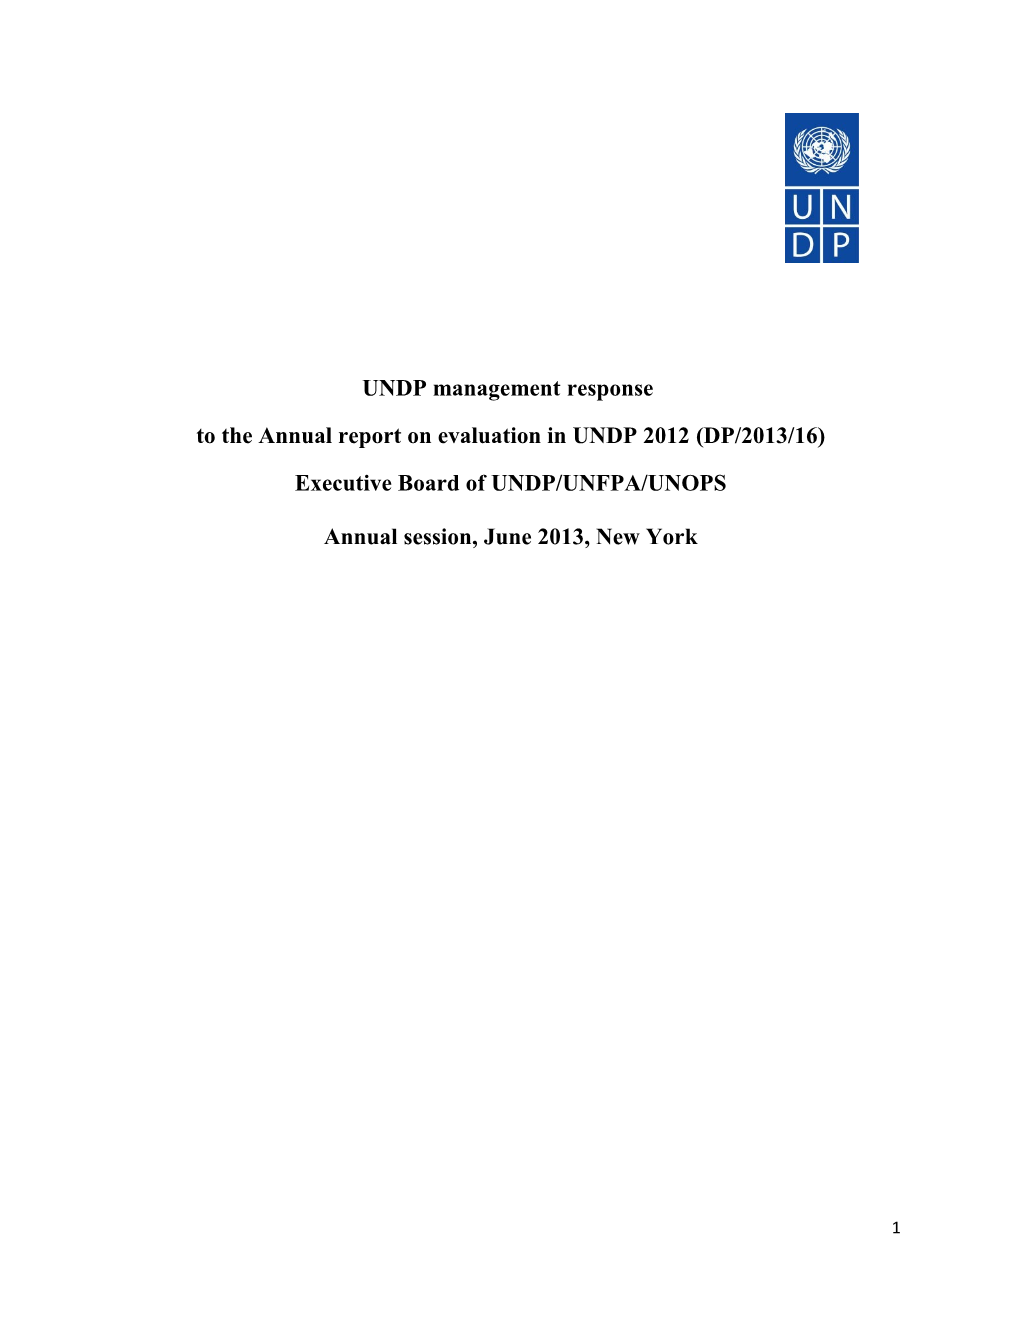 To the Annual Report on Evaluation in UNDP 2012(DP/2013/16)